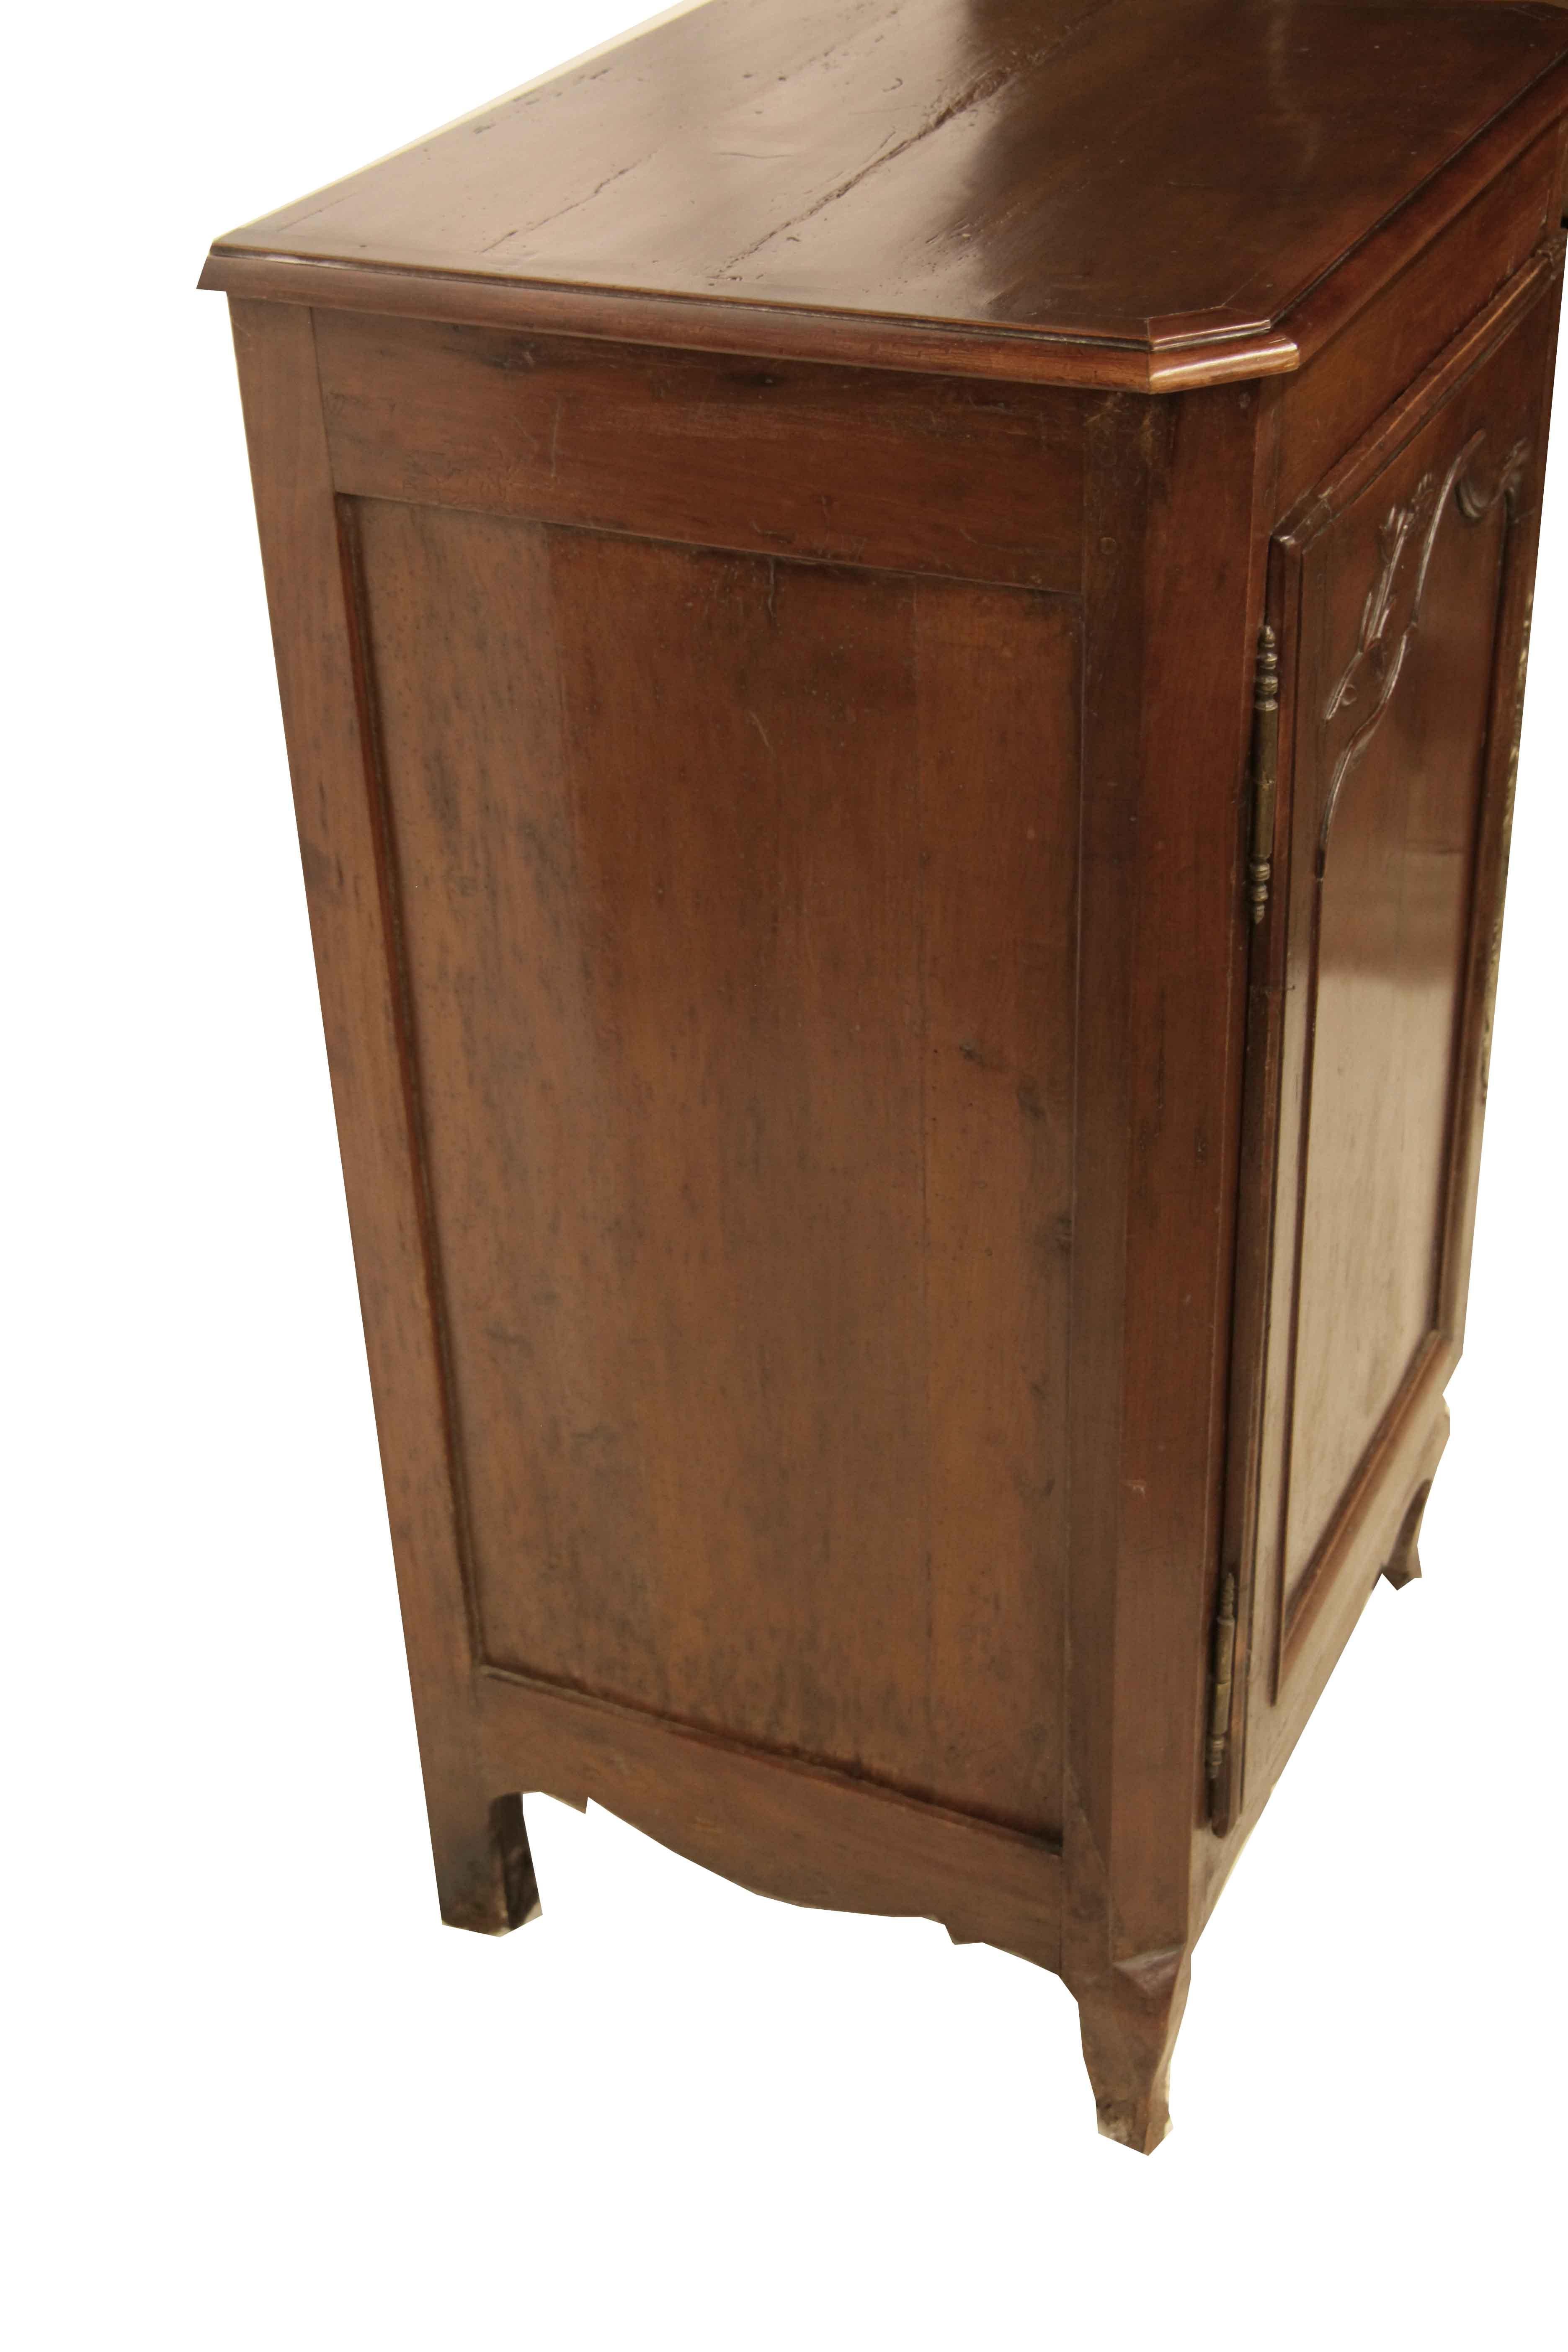 French cherry cabinet, the top with ''bread boarded'' and shaped edge molding , door and sides with inset panels, the door has carved foliate in relief and is hung on brass pin hinges, the long etched brass escutcheon is typical for the piece but is